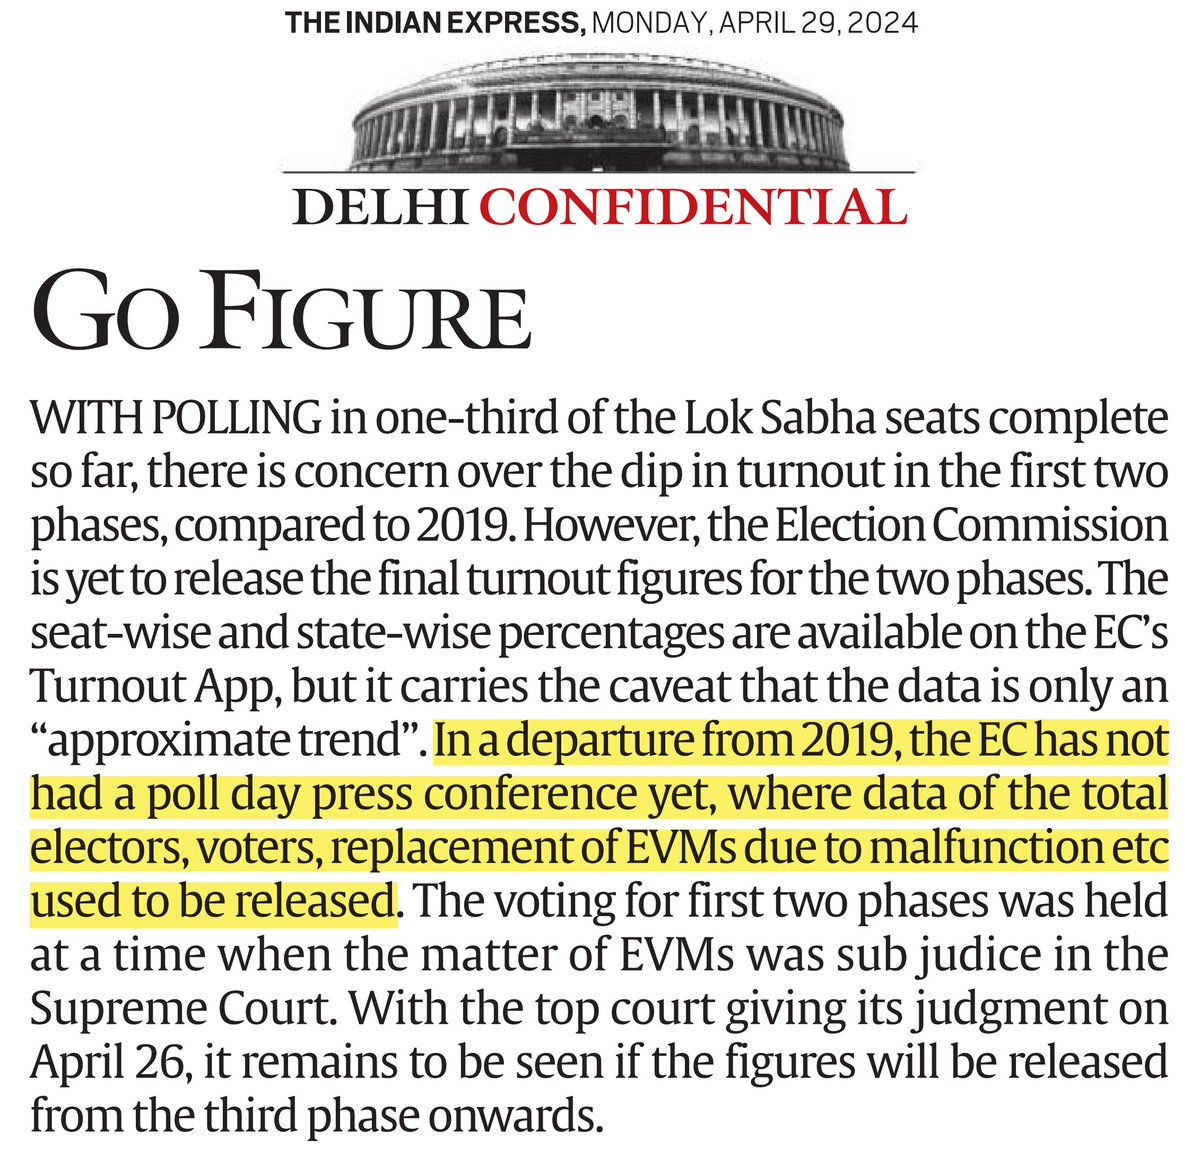 'In a departure from 2019, the EC has not had a poll day press conference yet, where data of the total electors, voters, replacement of EVMs due to malfunction etc used to be released' 🧐